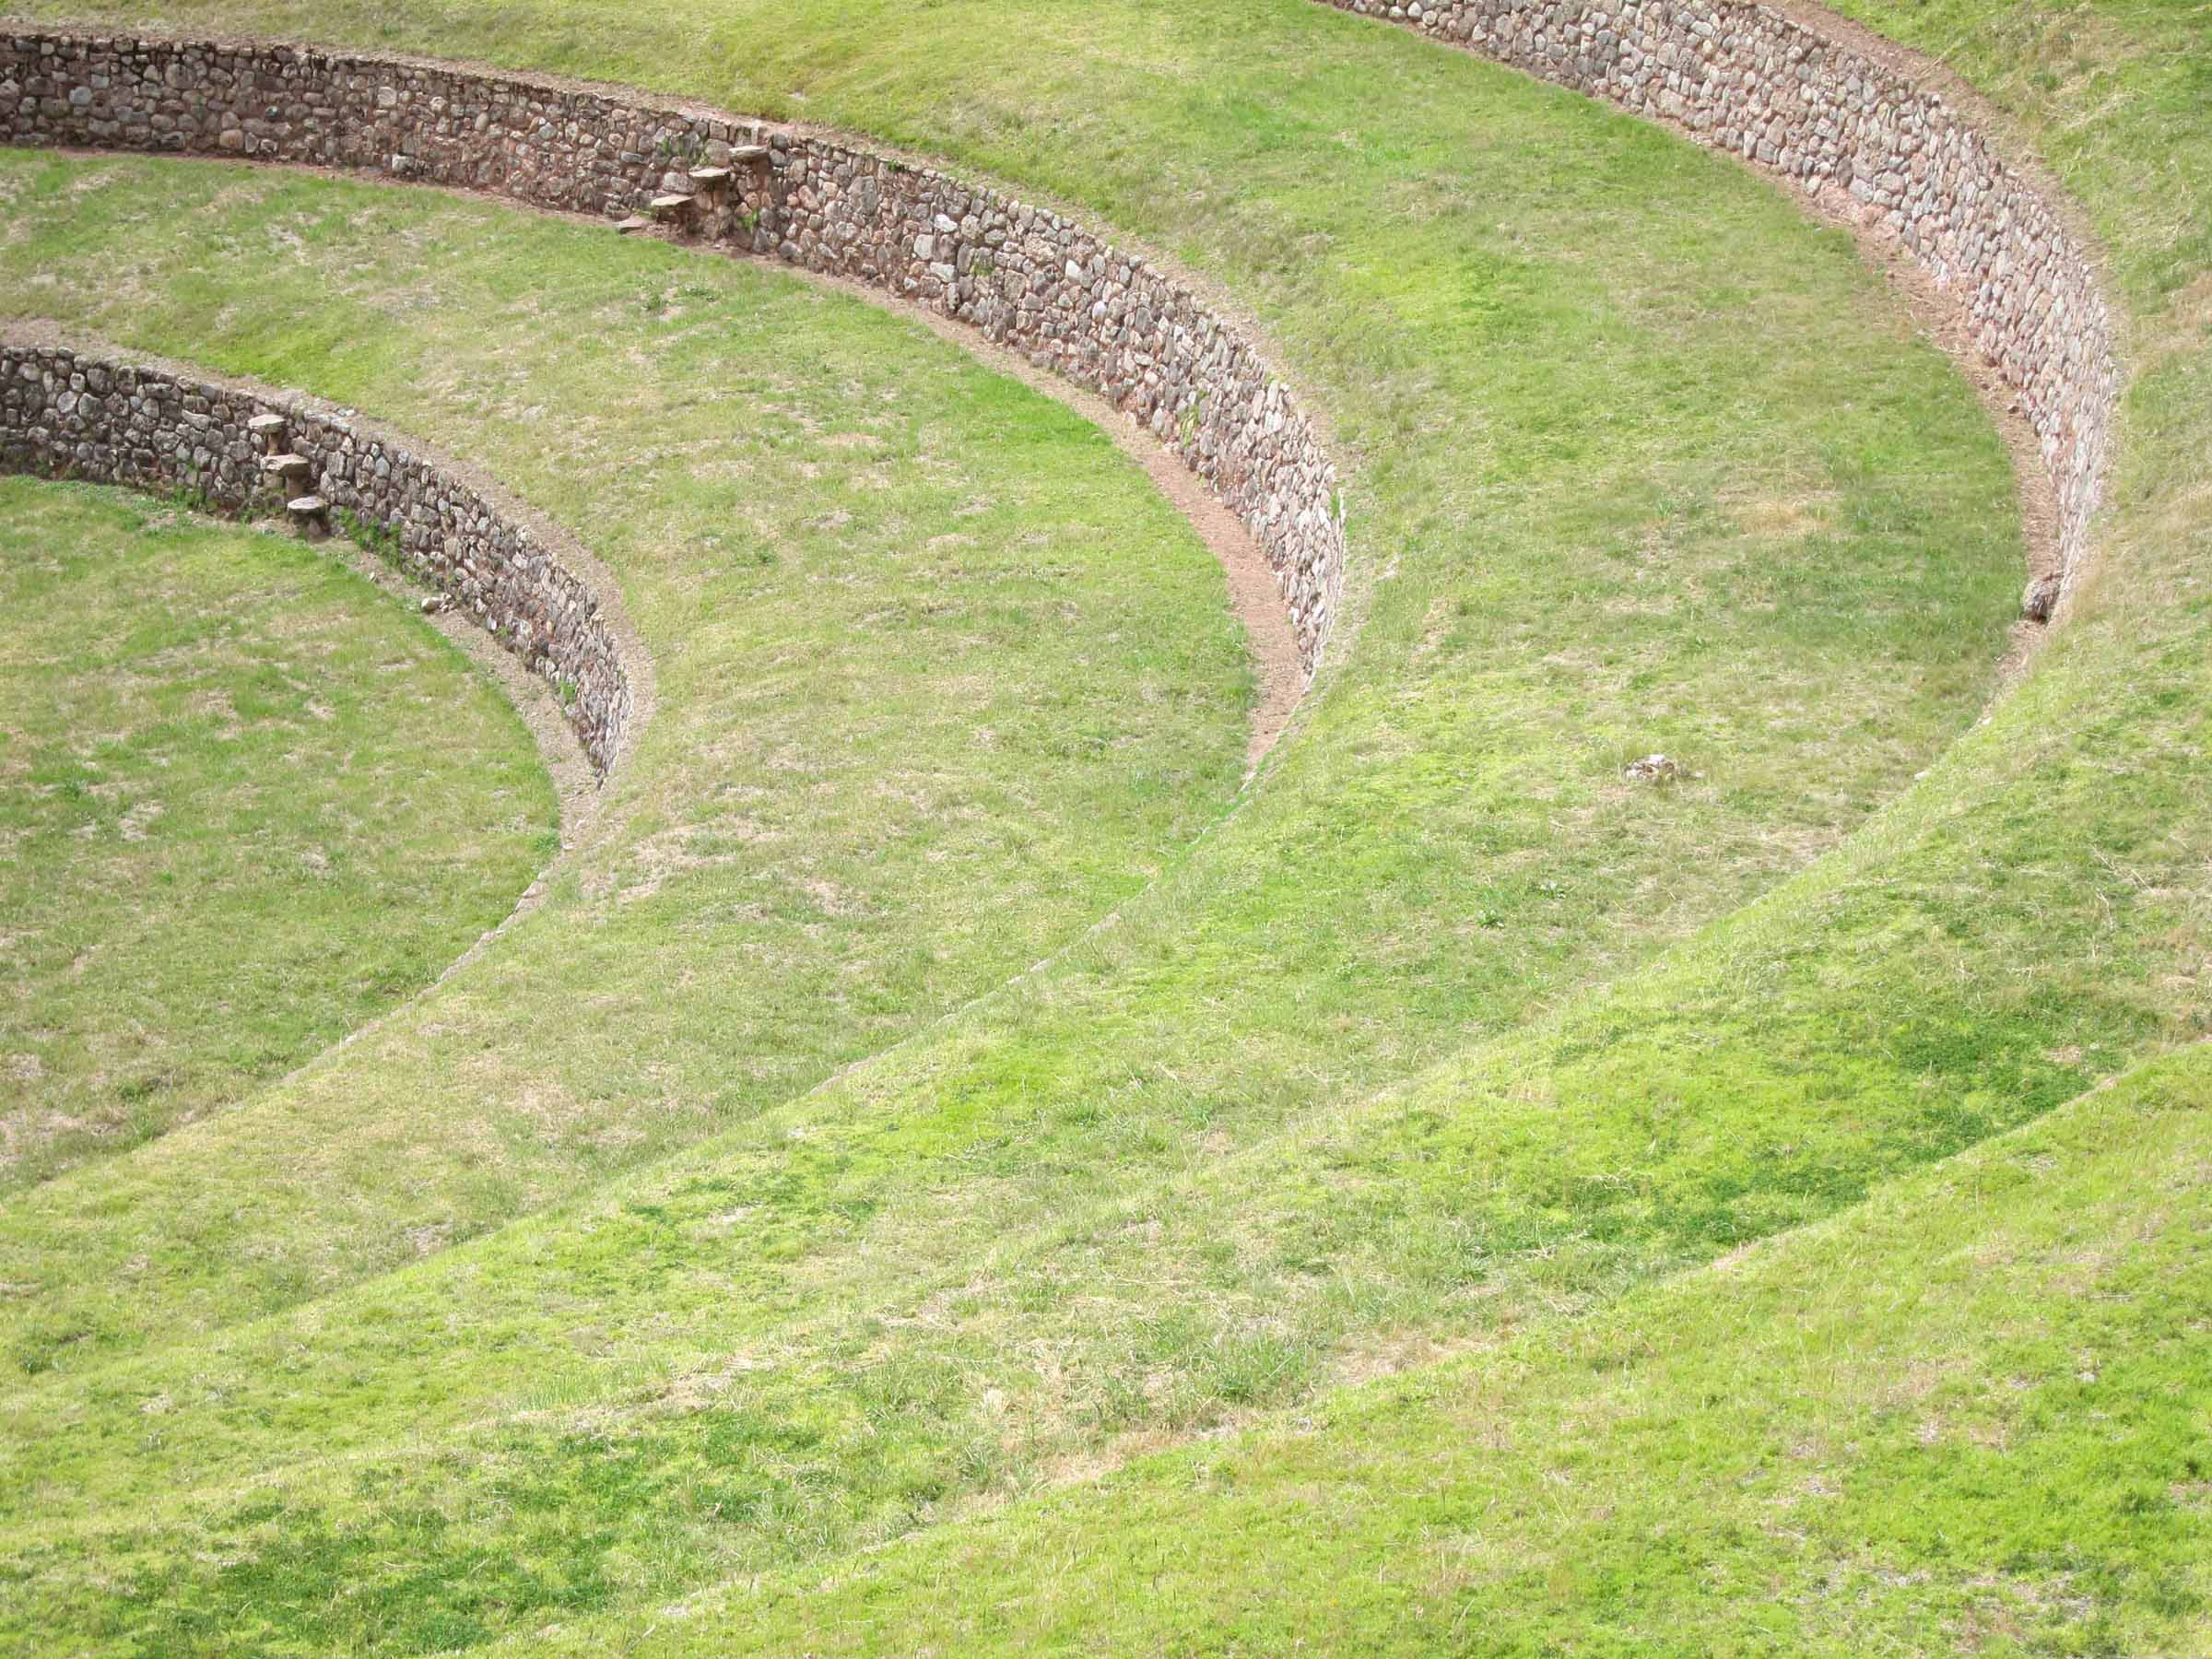   Incan Agricultural Terraces, Moray  